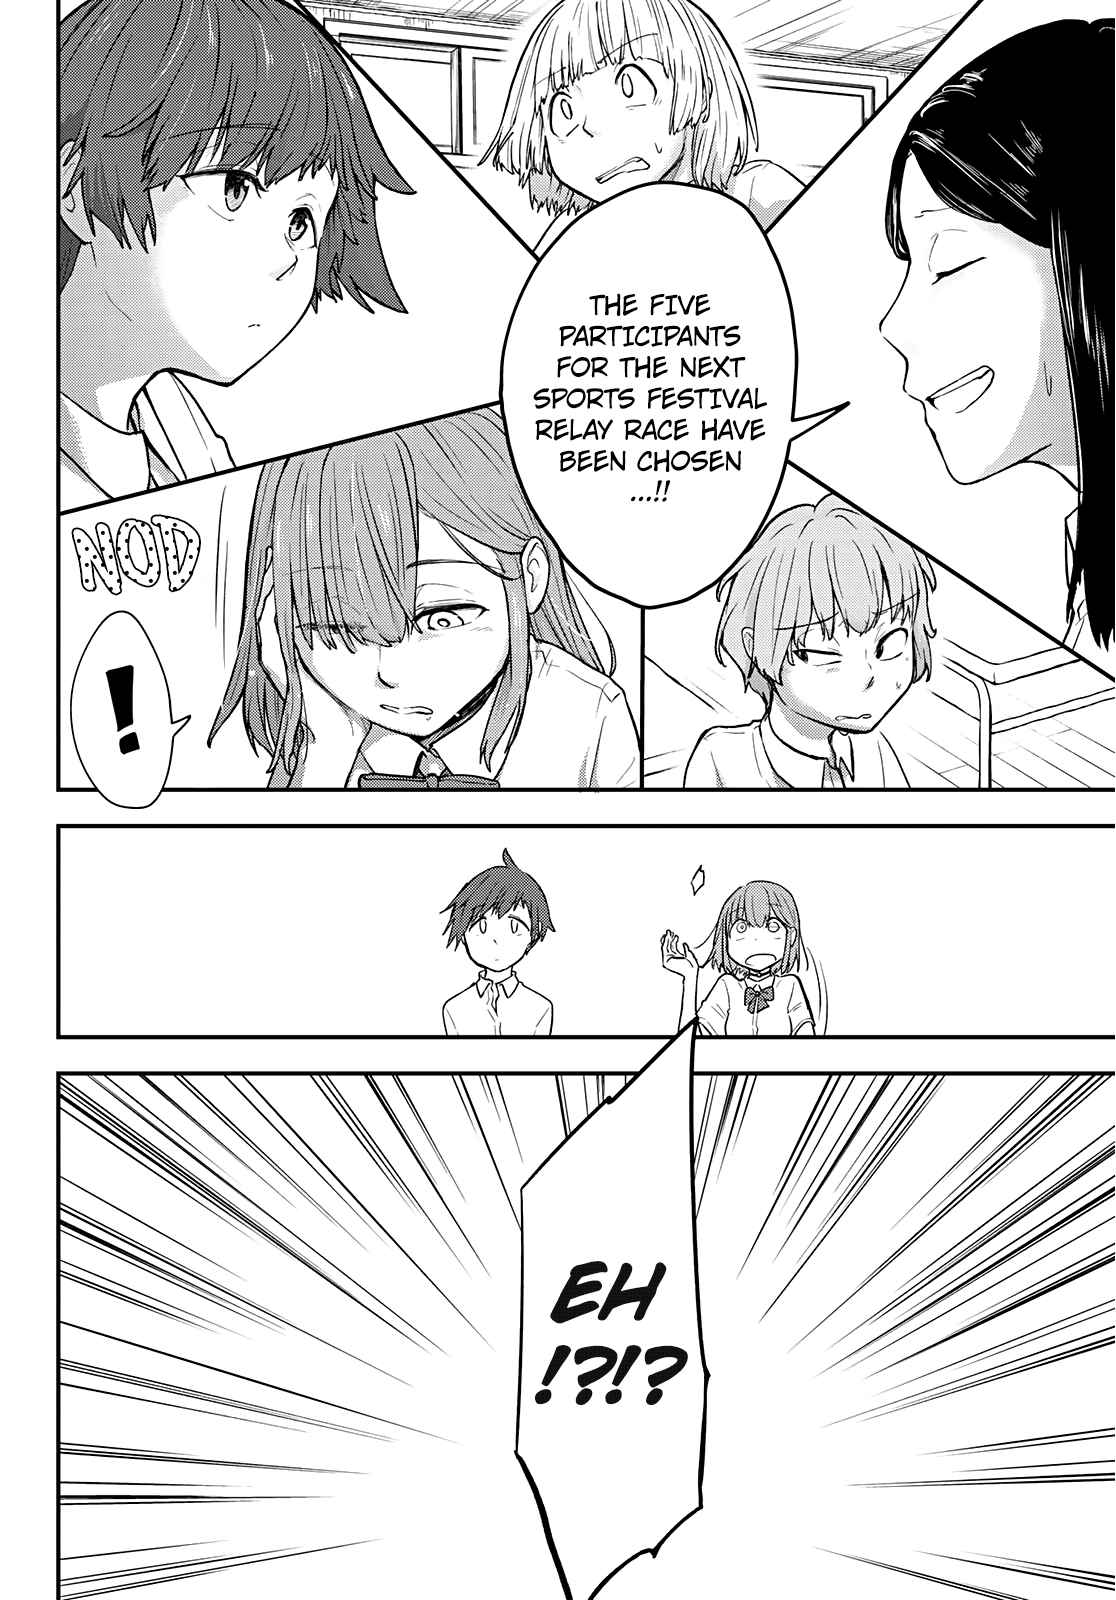 Hiyumi's Country Road Ch. 9 A Tireless Strategy